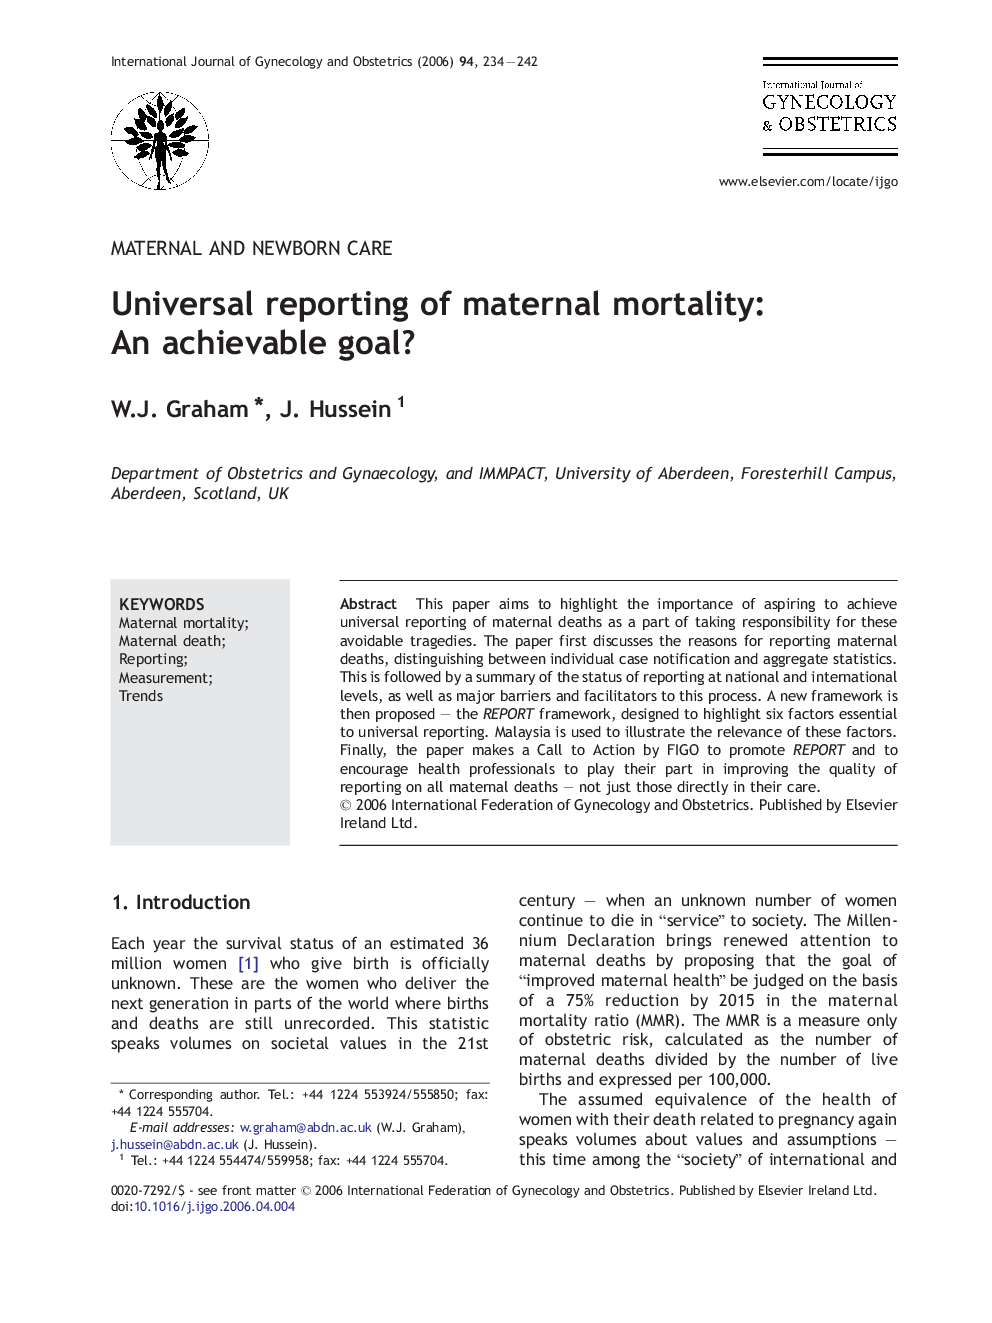 Universal reporting of maternal mortality: An achievable goal?